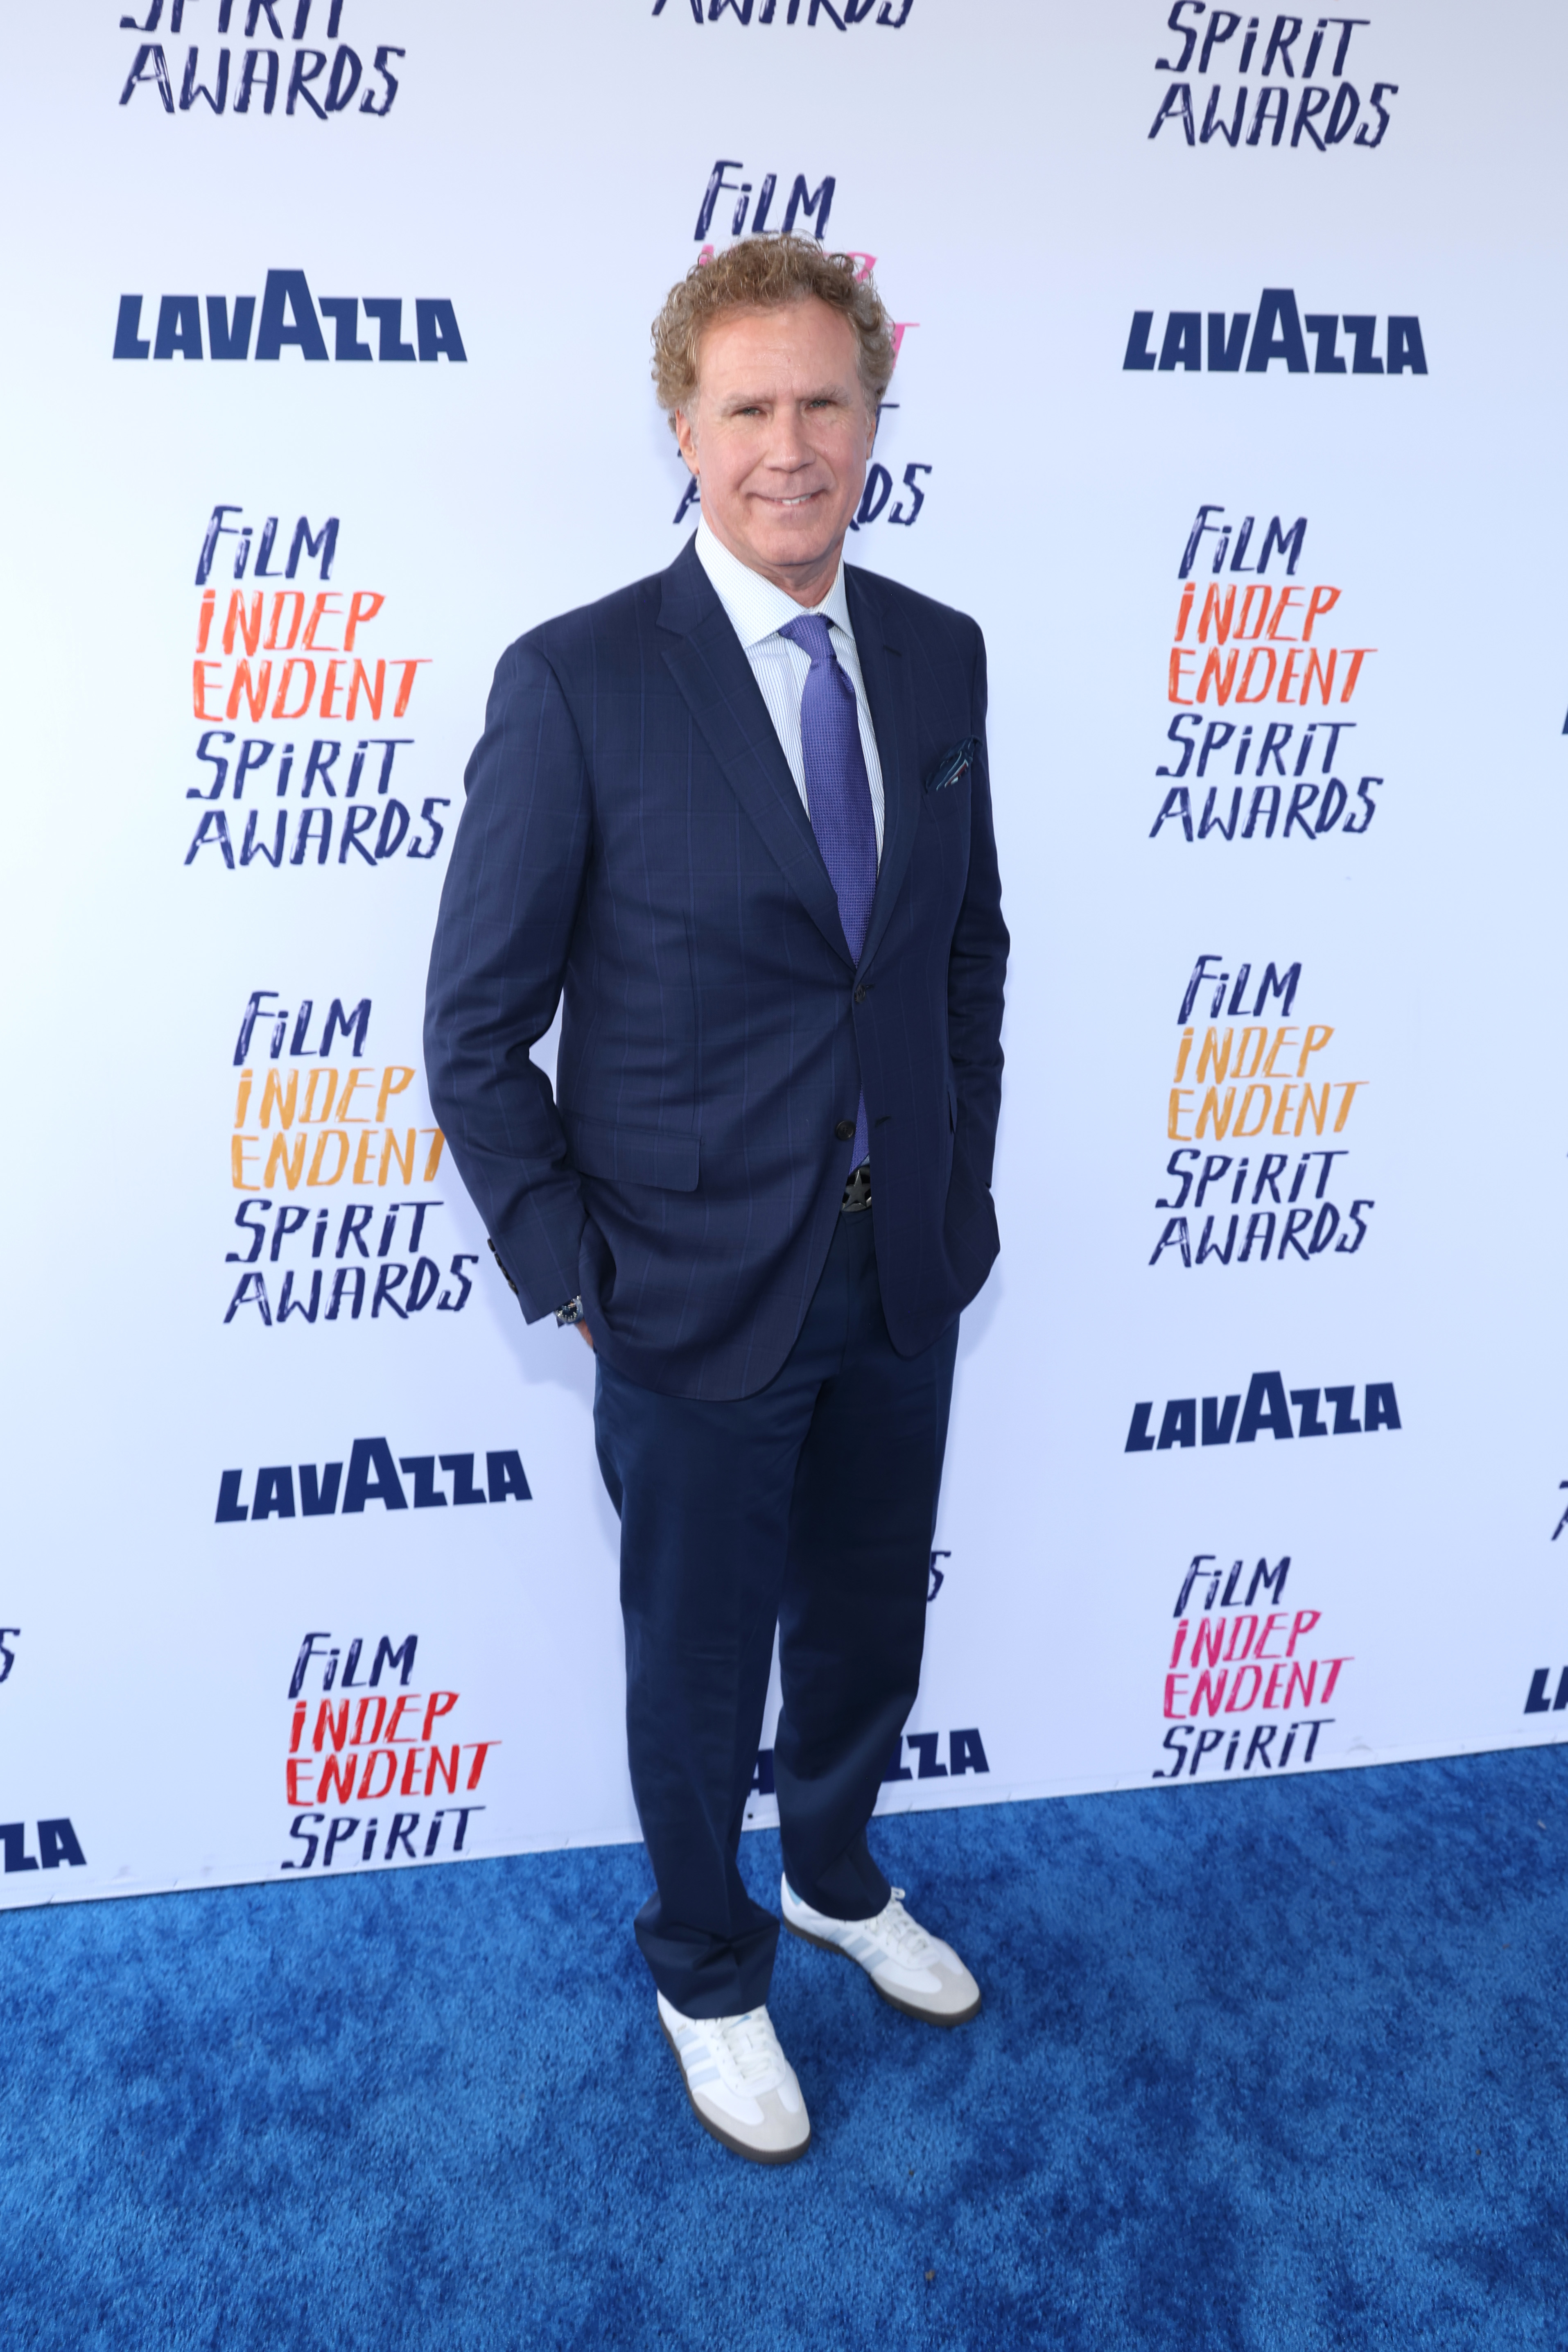 Will in a suit with a tie posing against a backdrop with &#x27;Film Independent Spirit Awards&#x27; logos